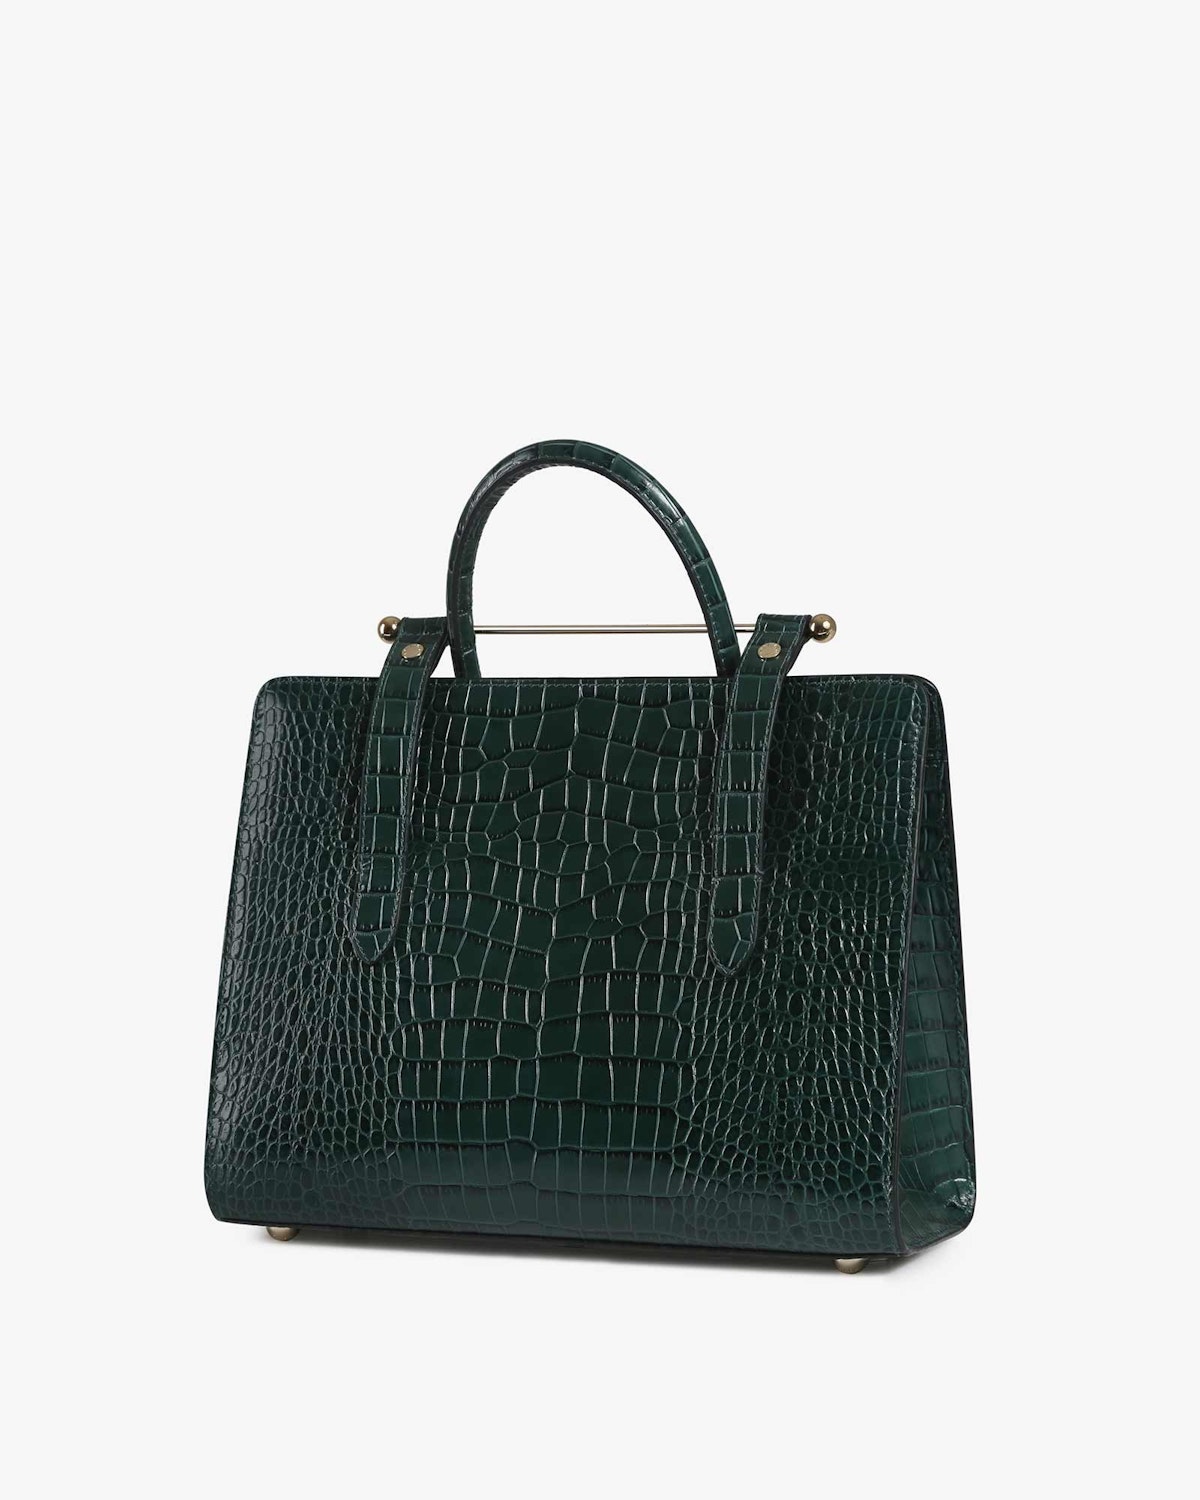 The Strathberry Midi Tote - Top Handle Leather Tote Bag - Green ...